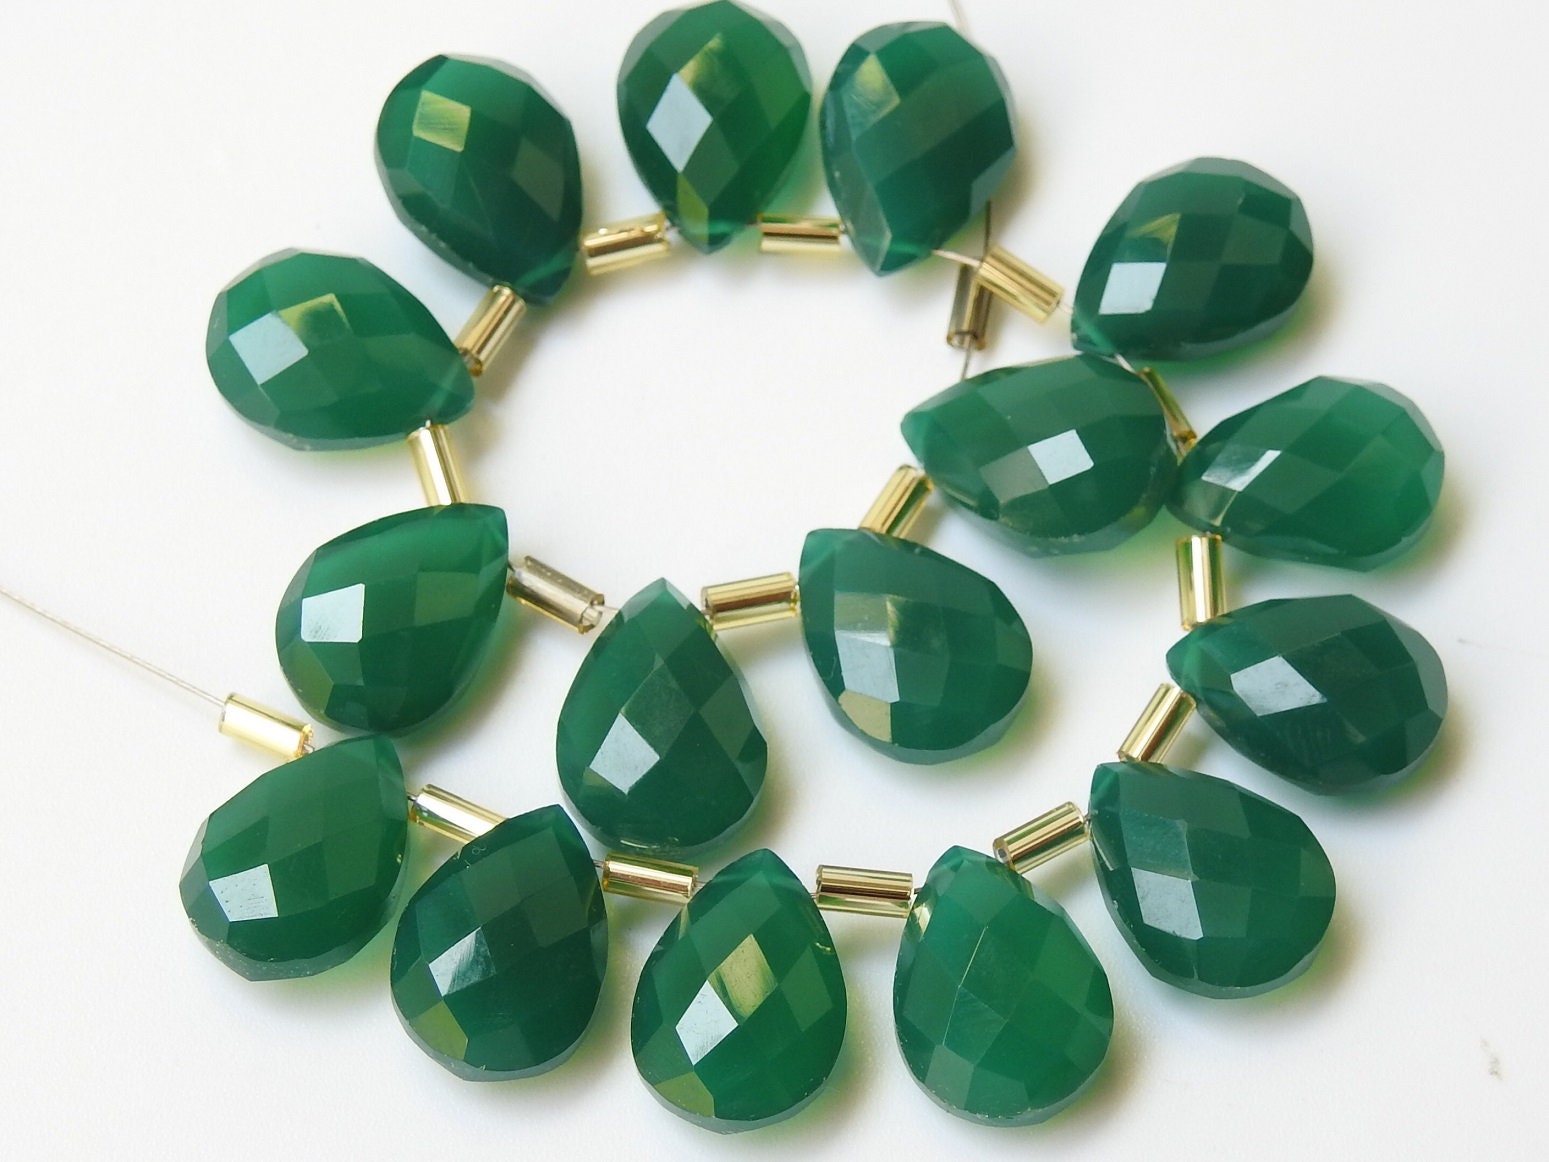 14X10MM Matched Pair,Green Onyx Faceted Teardrops,Drops,Loose Stone,Handmade Bead,Wholesale Price,New Arrivals PME-CY1 | Save 33% - Rajasthan Living 14